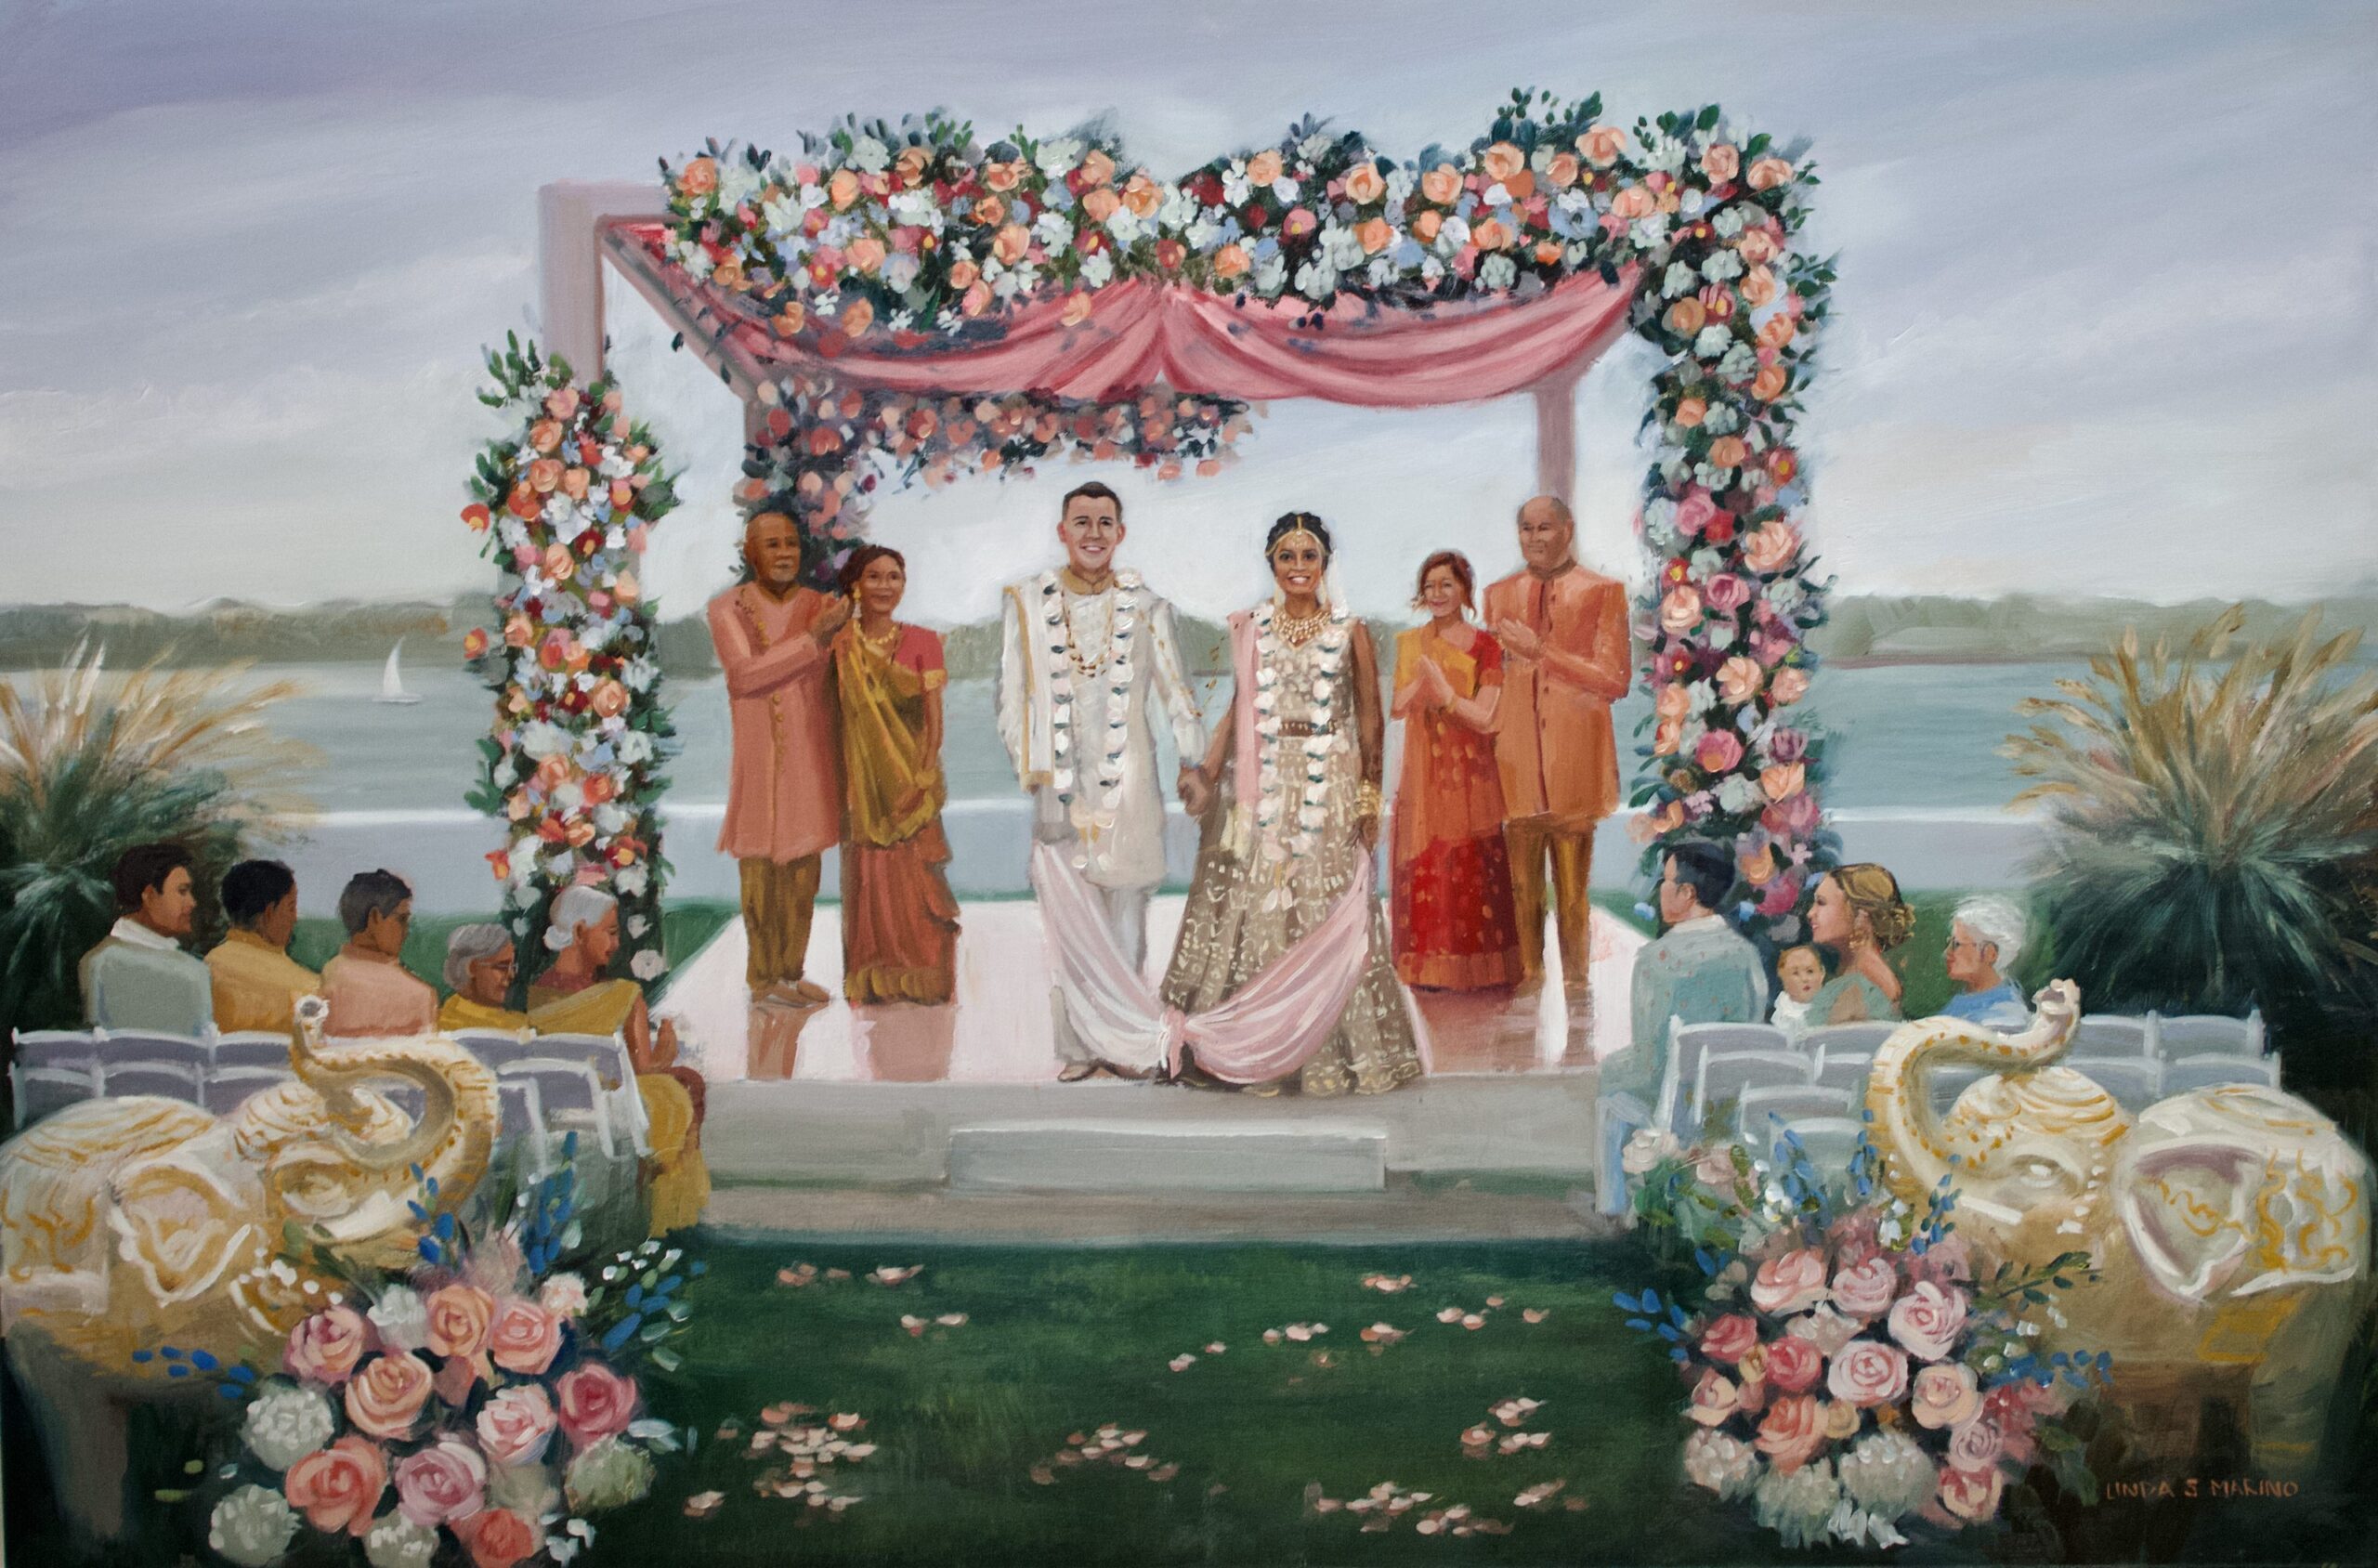 Newport live wedding painting, of outdoor ceremony, with family and florals